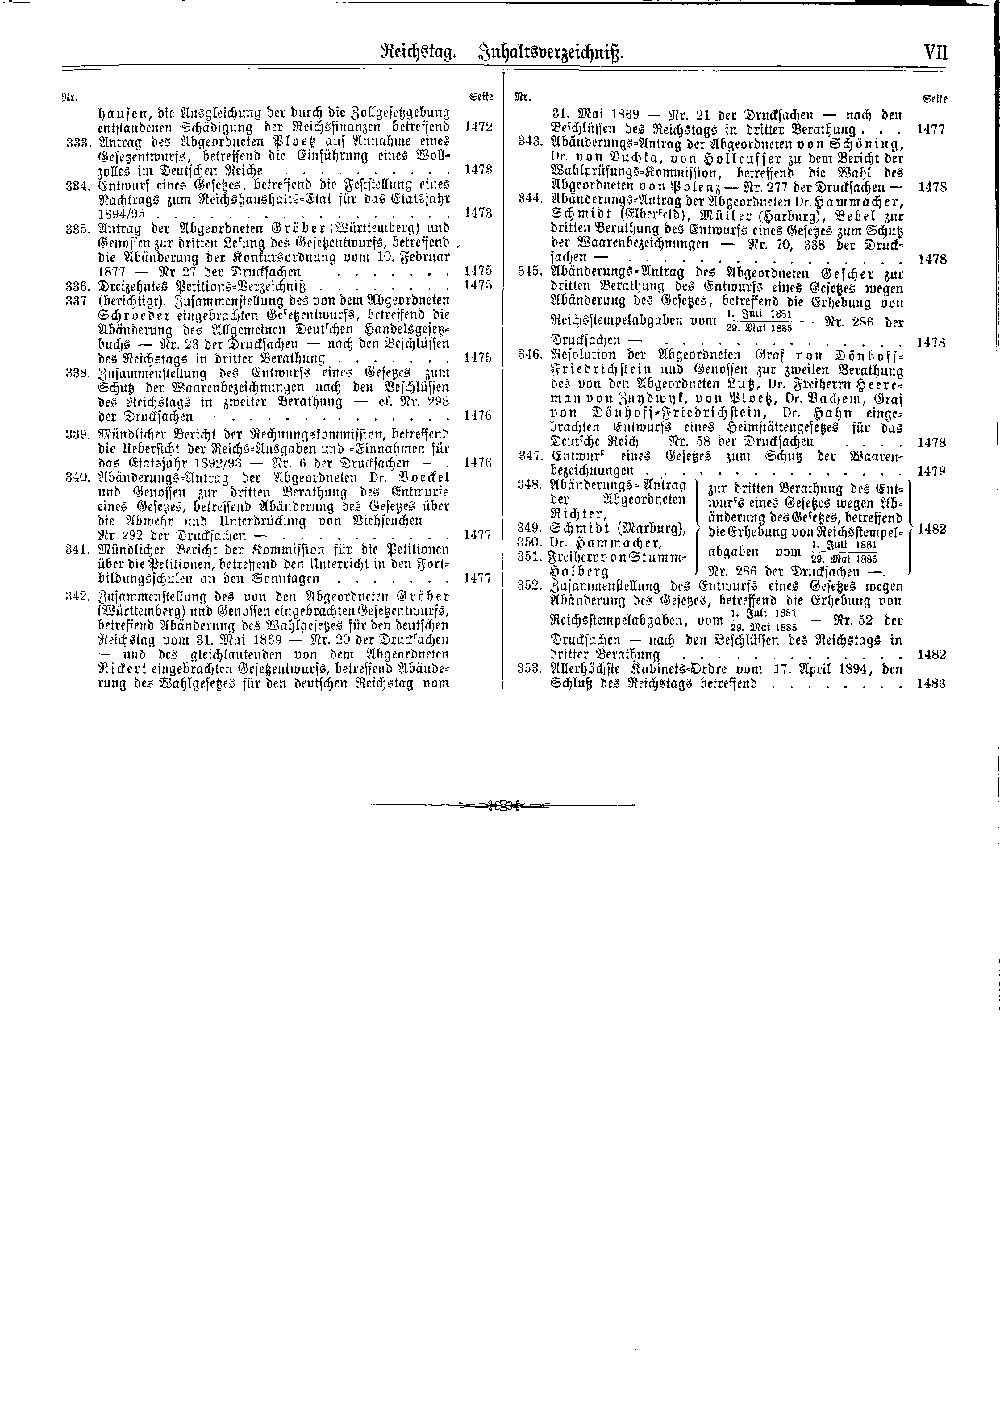 Scan of page VII